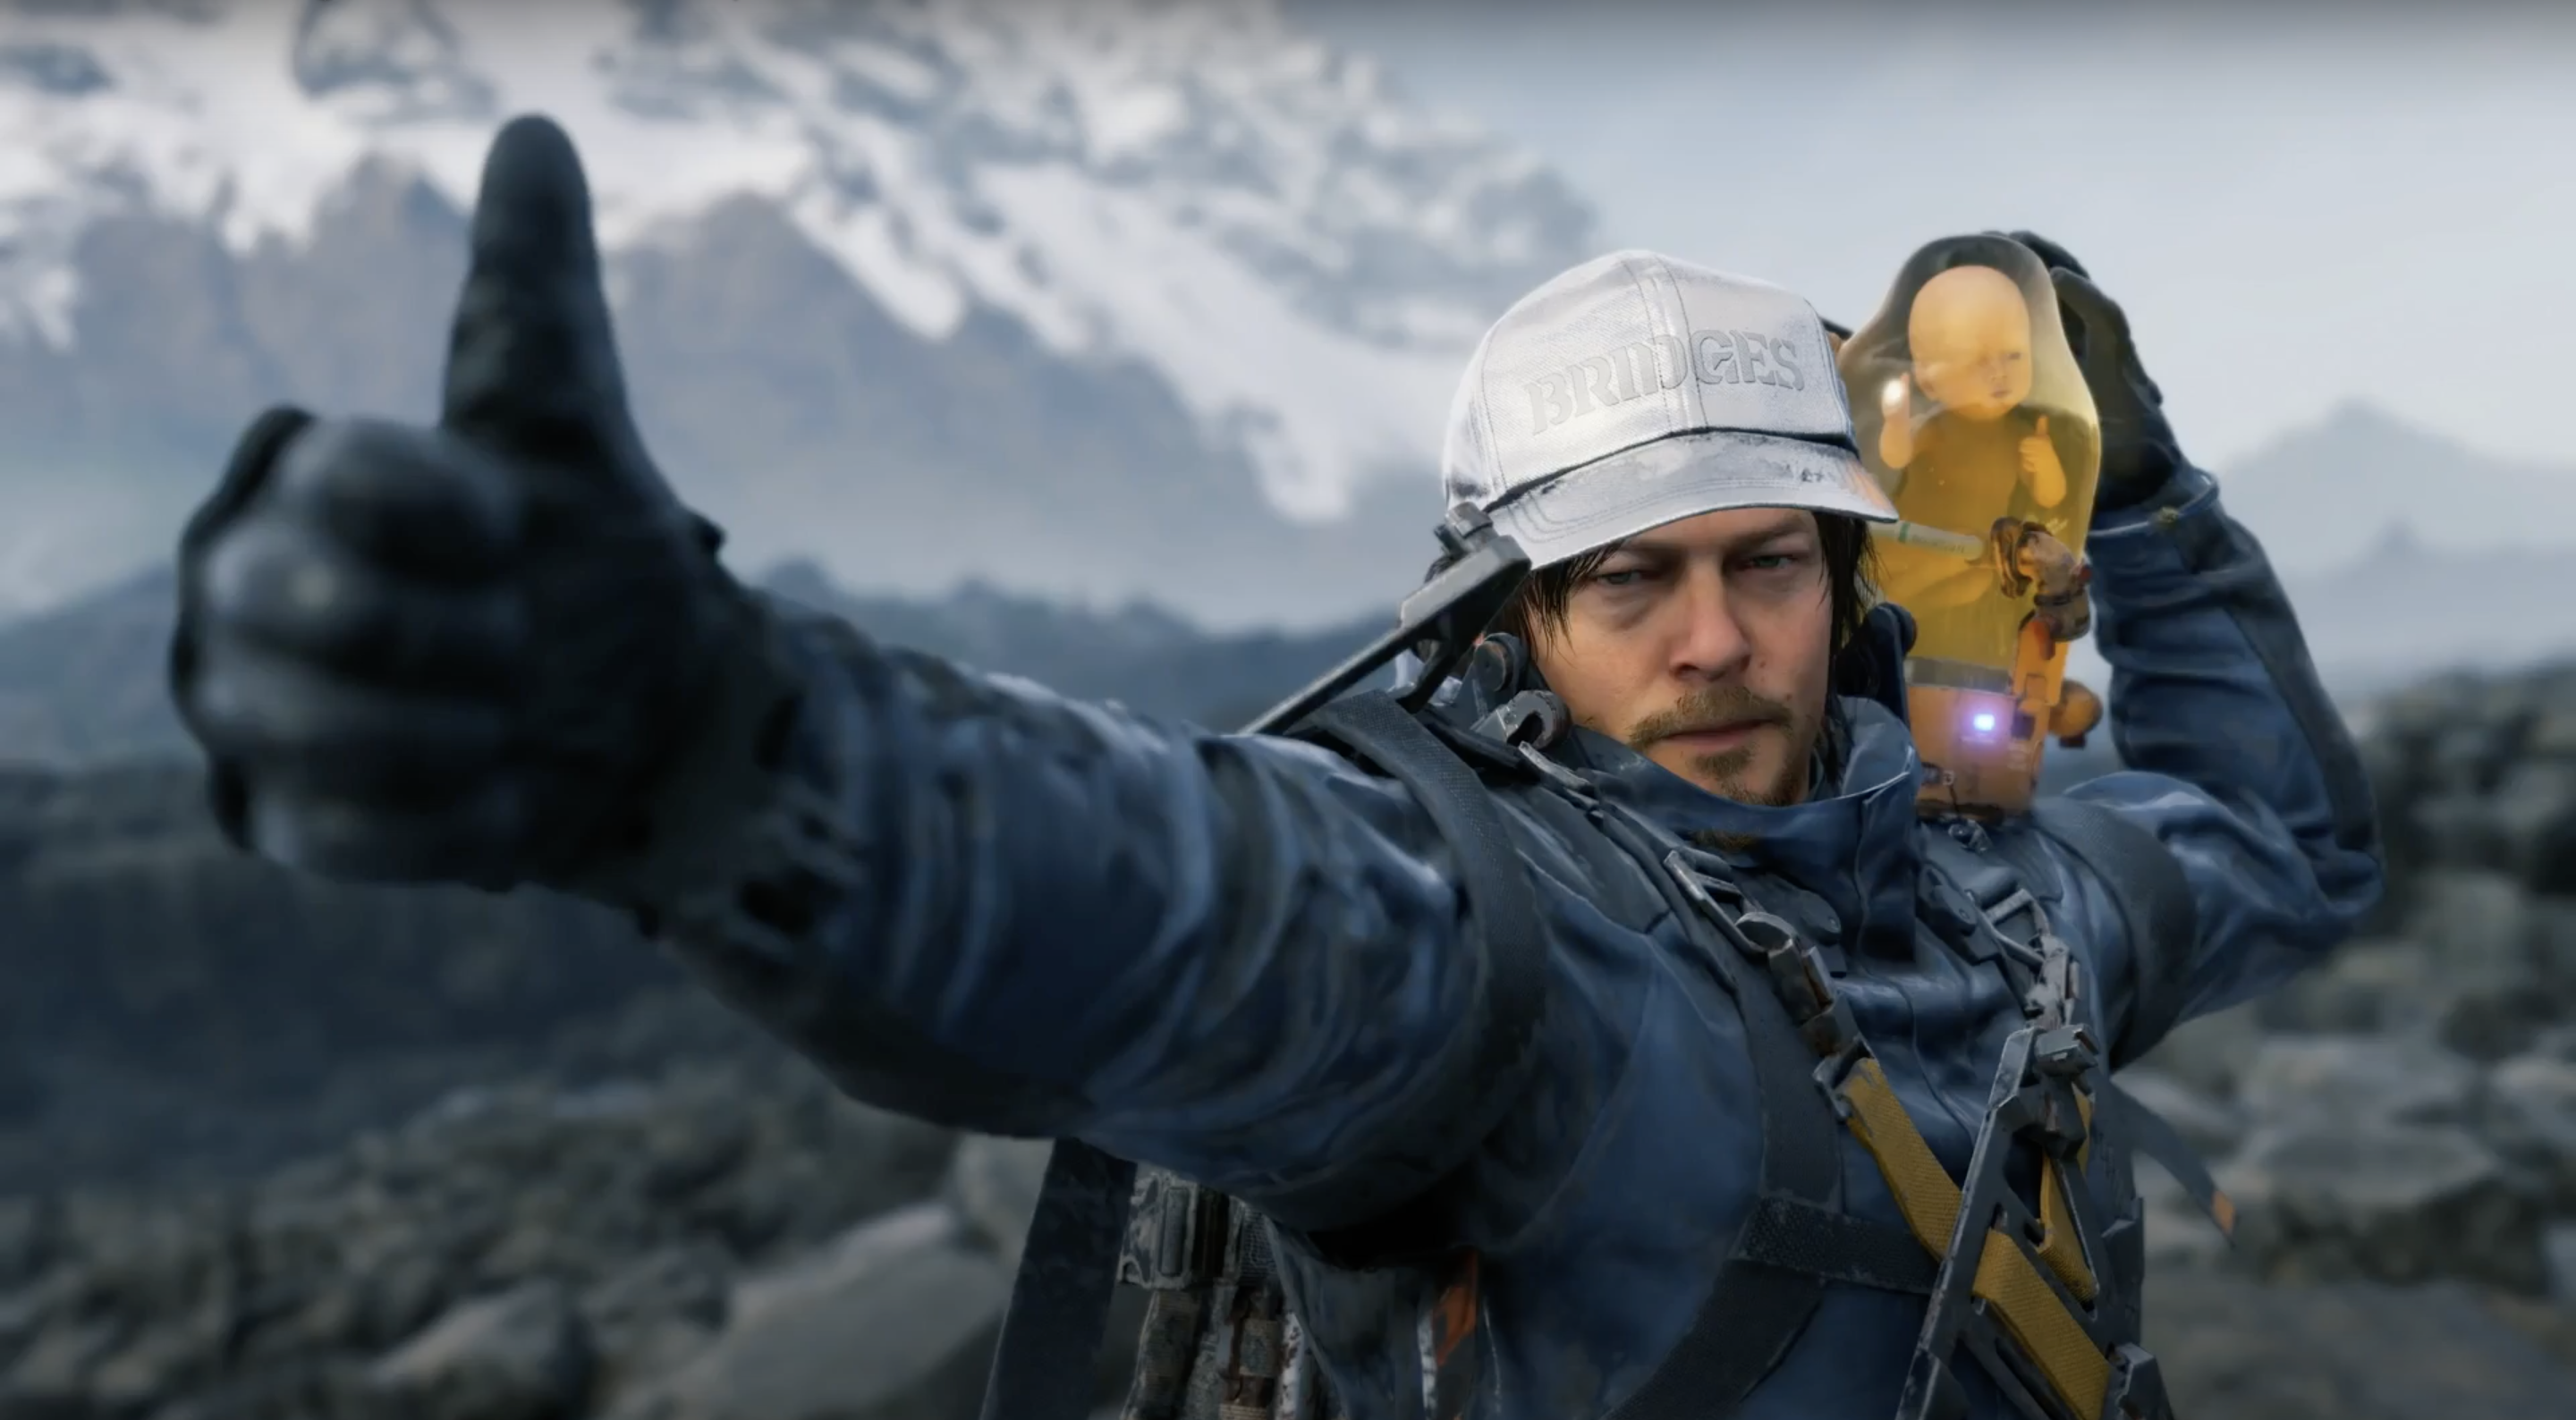 Death Stranding - Sam Porter carries a BB on his shoulder and gives a thumbs up to the camera.